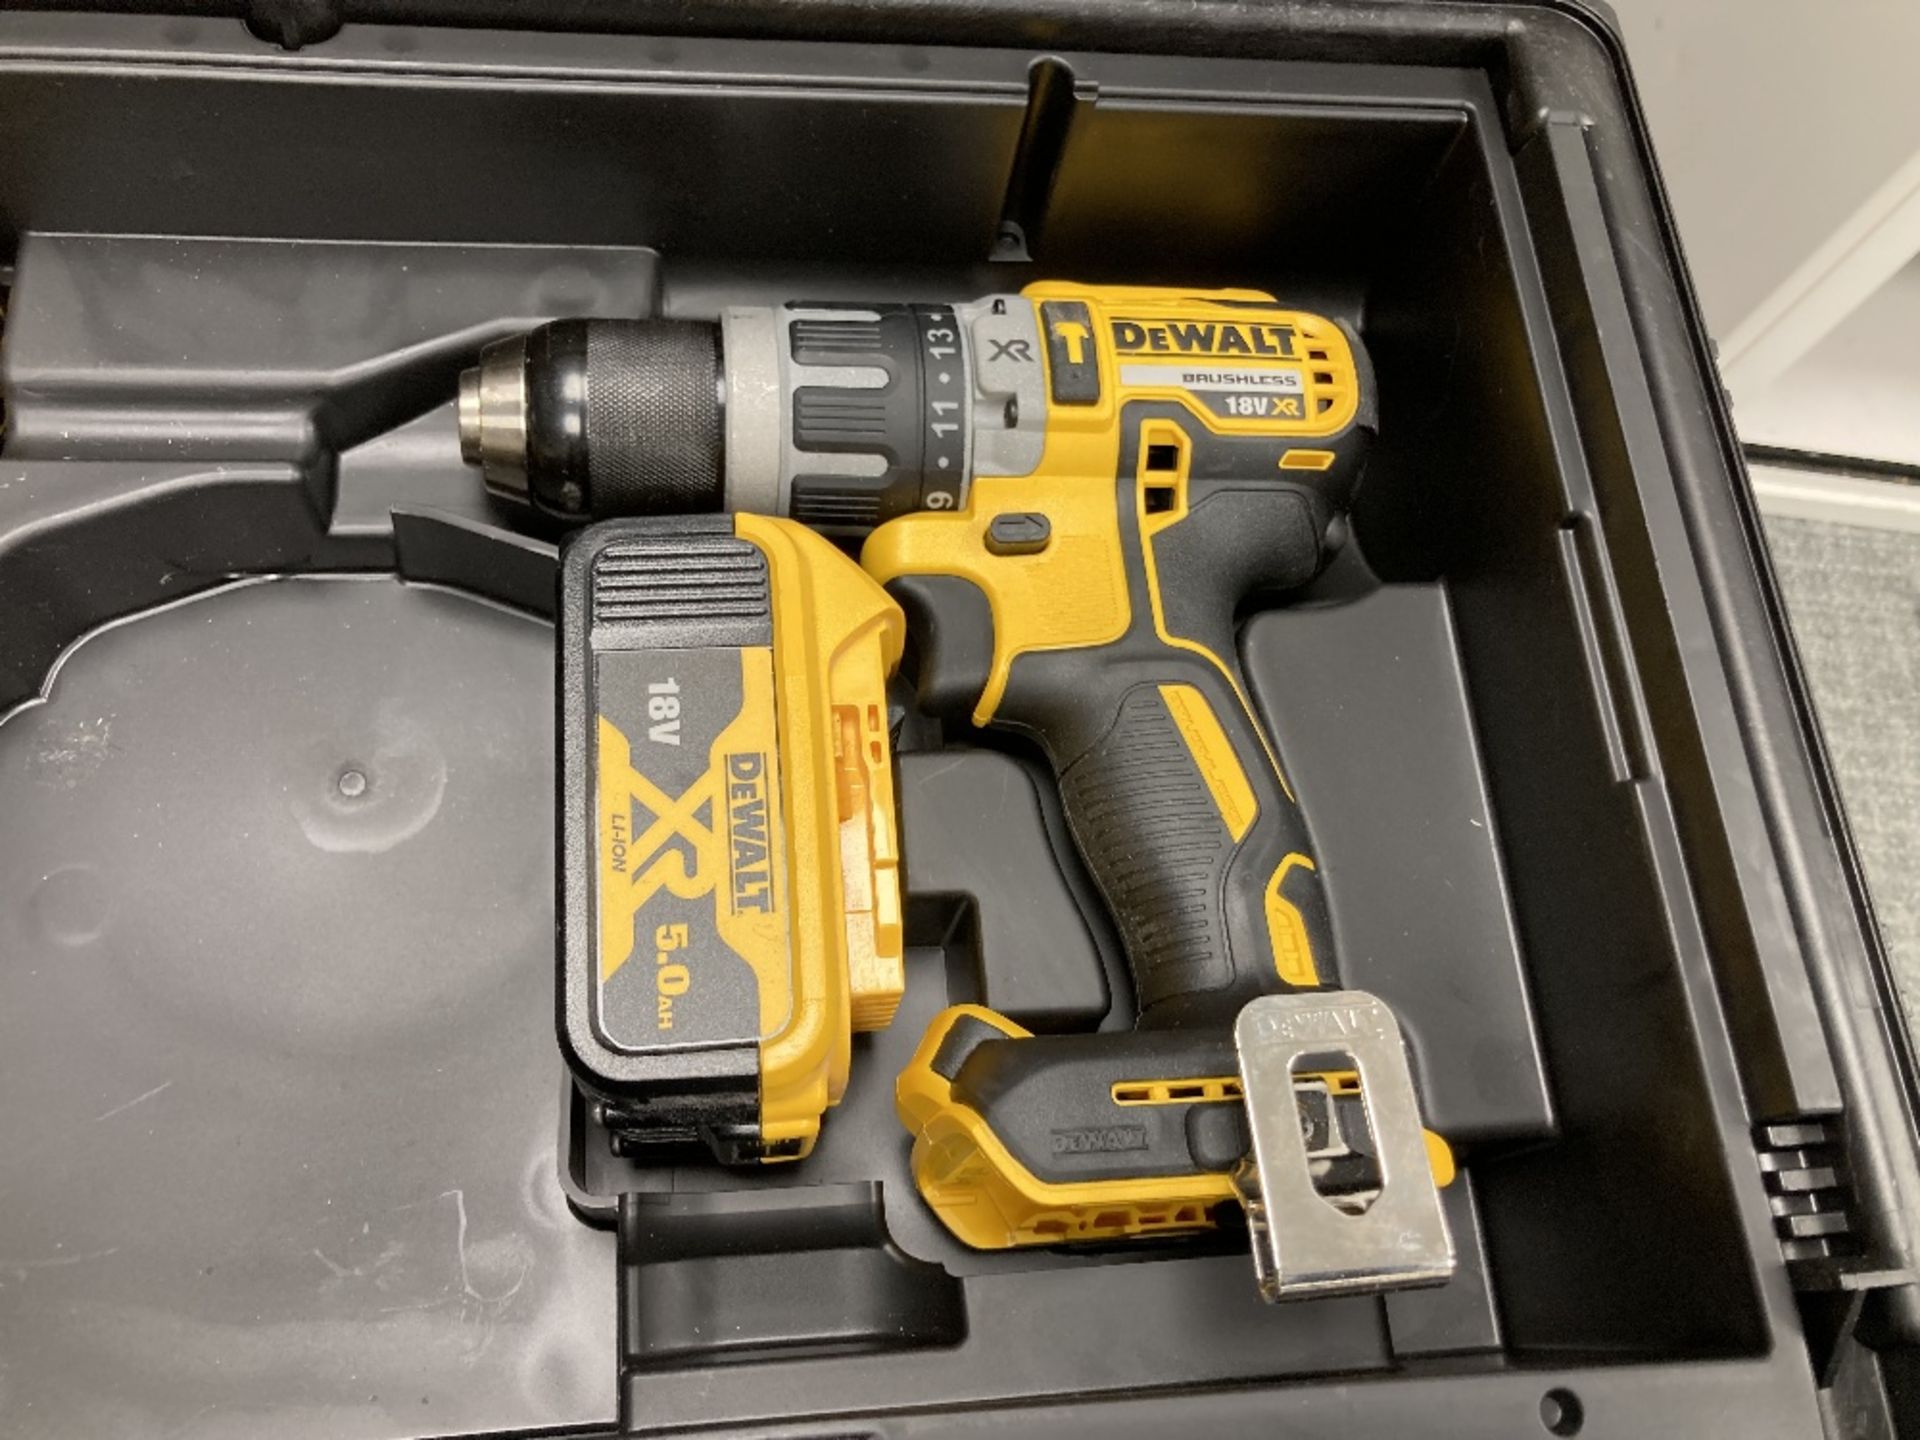 DeWalt DCK266P2-GB 18V XR Brushless Combi Drill & Impact Driver Twin Kit with 2x 5.0Ah Batteries - Image 3 of 4